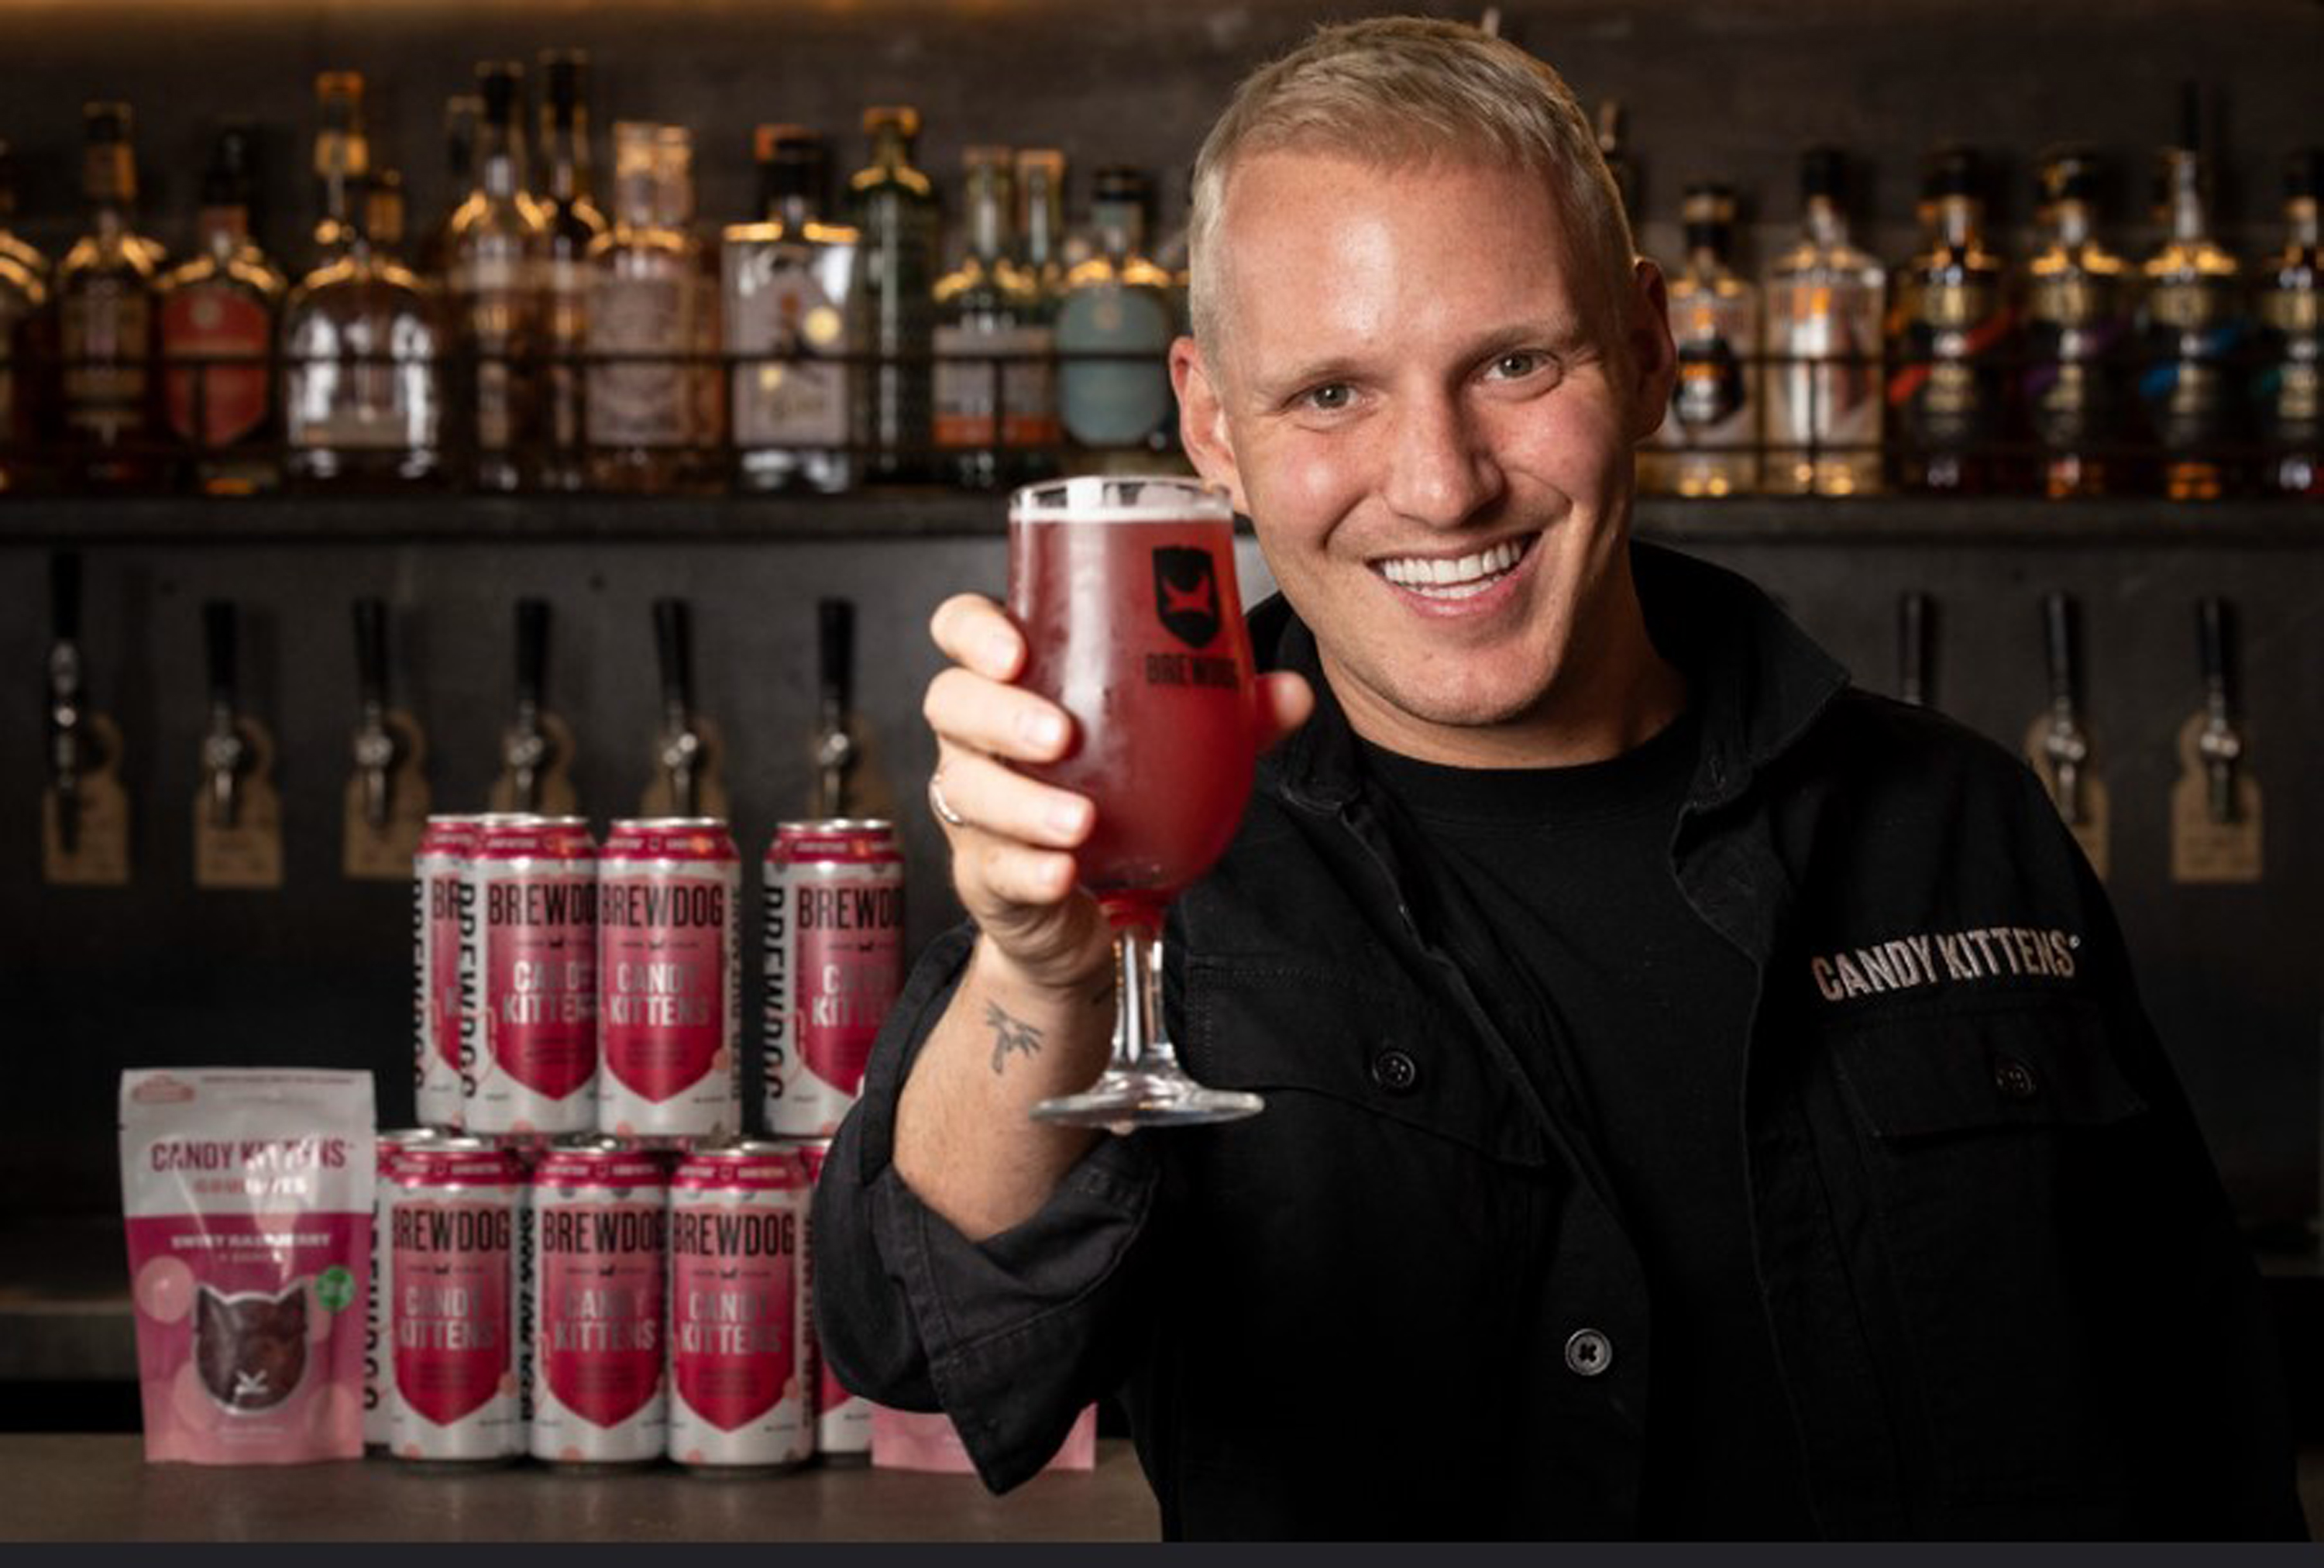 Jamie Laing with the pink beer